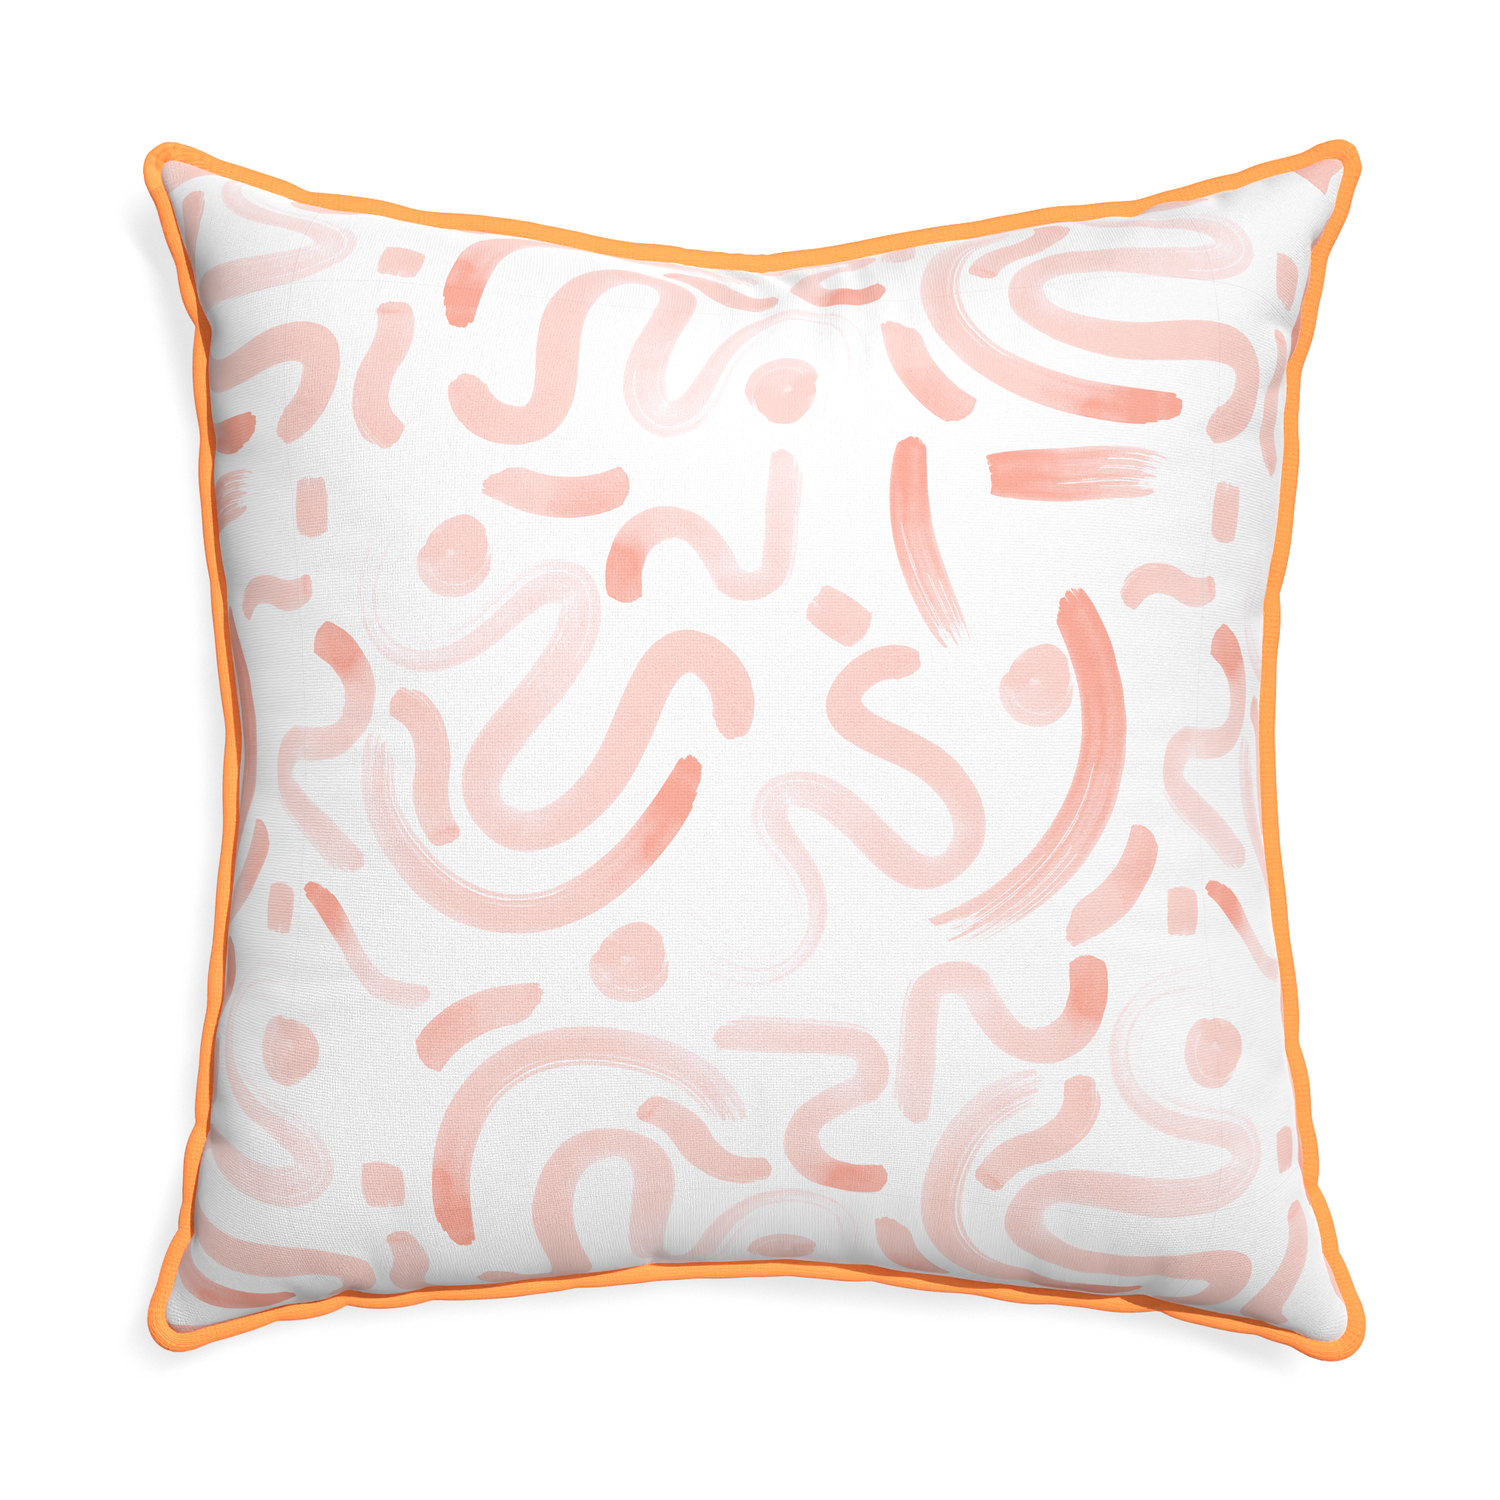 Euro-sham hockney pink custom pink graphicpillow with clementine piping on white background